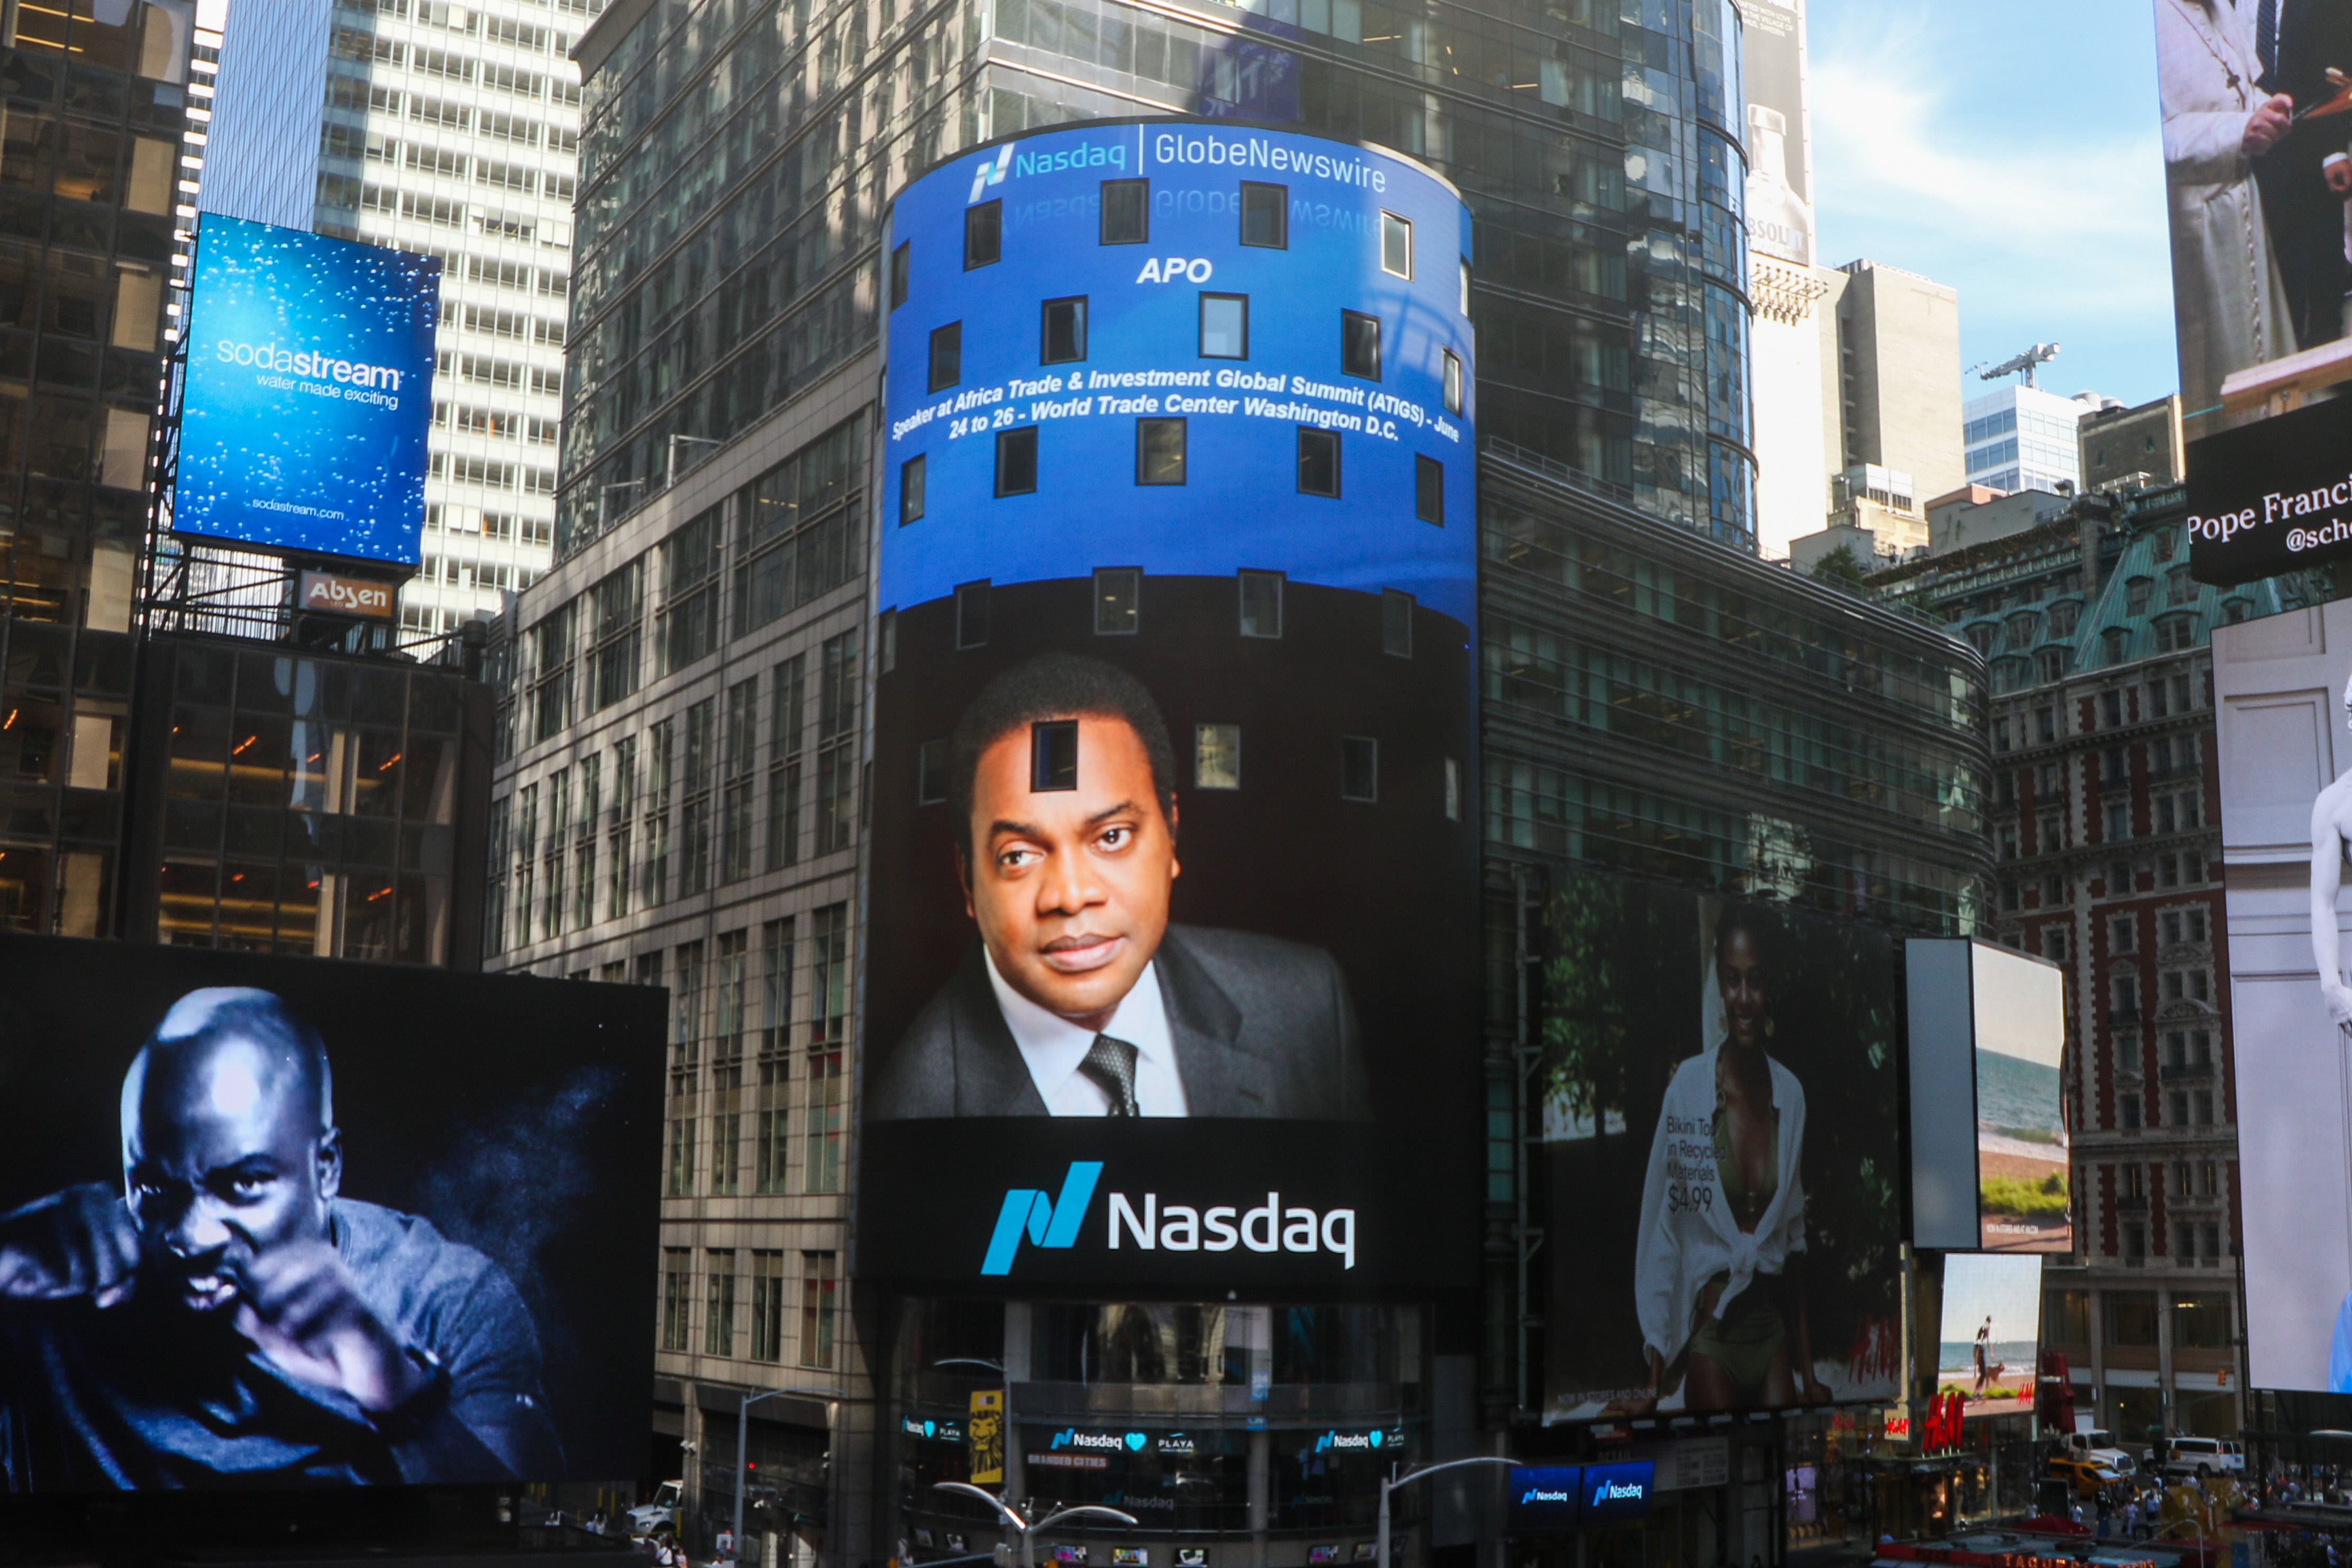 Photo: Donald Duke featured on Nasdaq Towers after speech at ATIGS